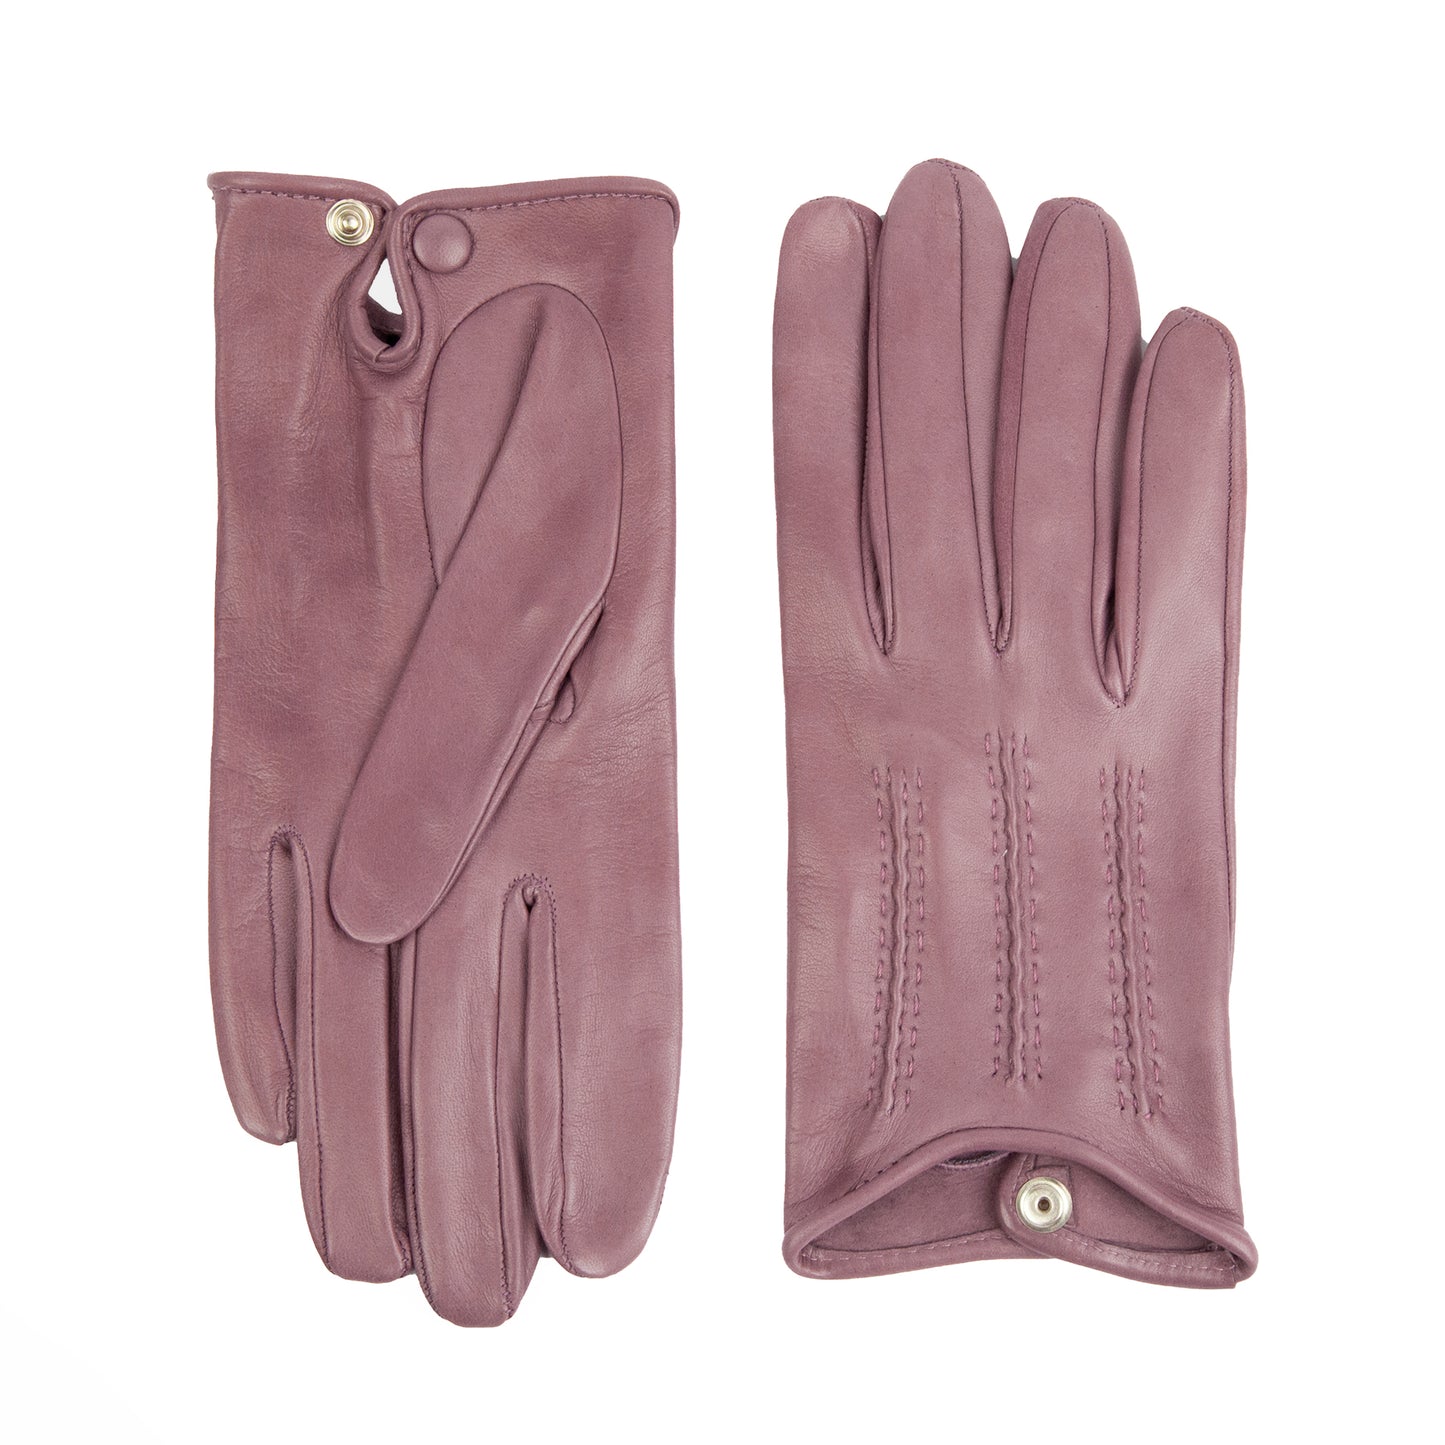 Women's unlined grey pink spring gloves